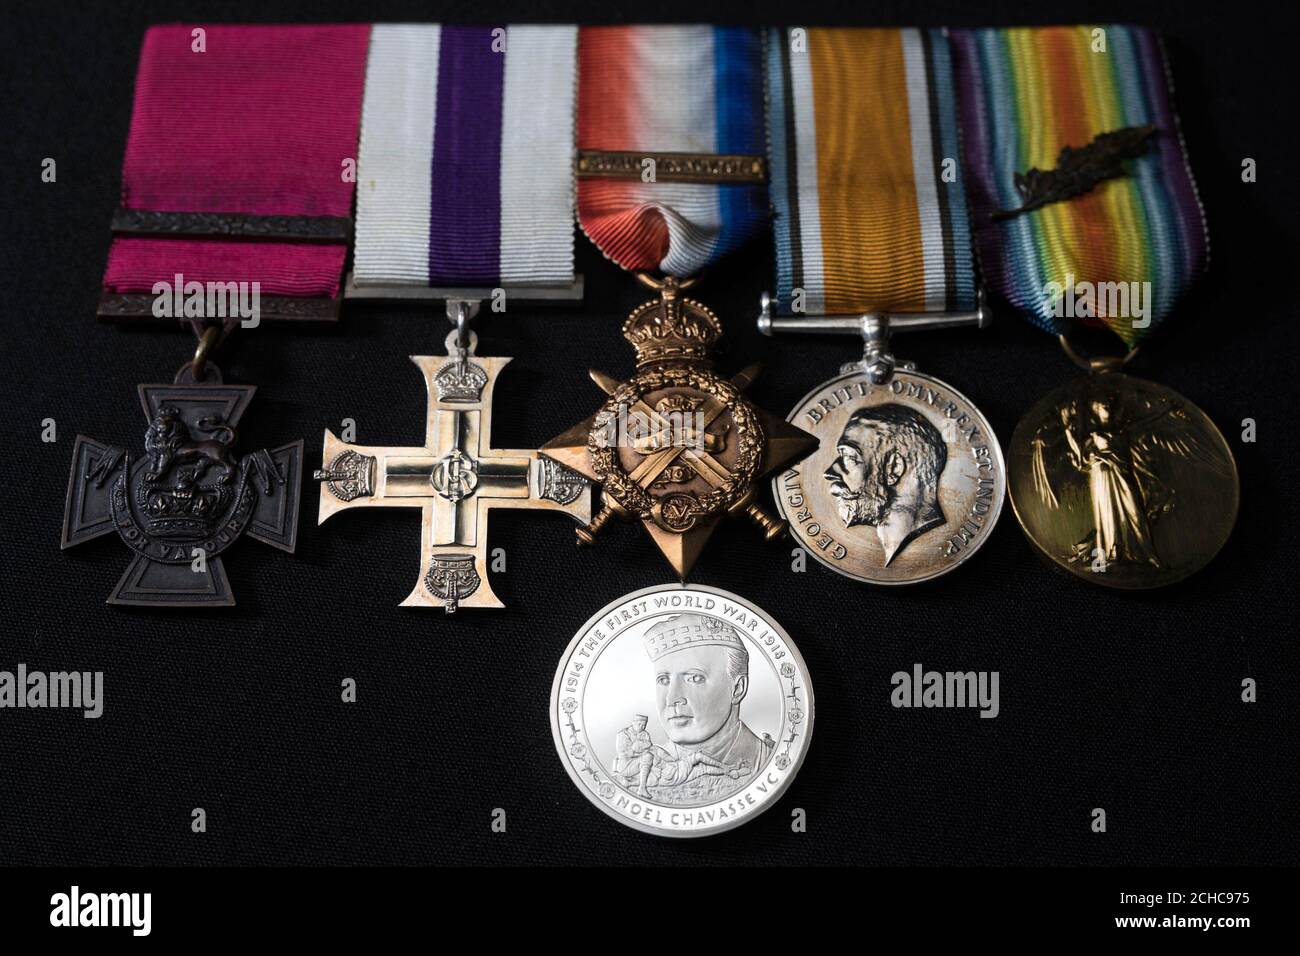 A commemorative £5 coin, which honours First World War hero Captain Noel Chavasse, unveiled by The Royal Mint at the Imperial War Museum in London, alongside his Victoria Cross that is part of the Lord Ashcroft collection. Stock Photo